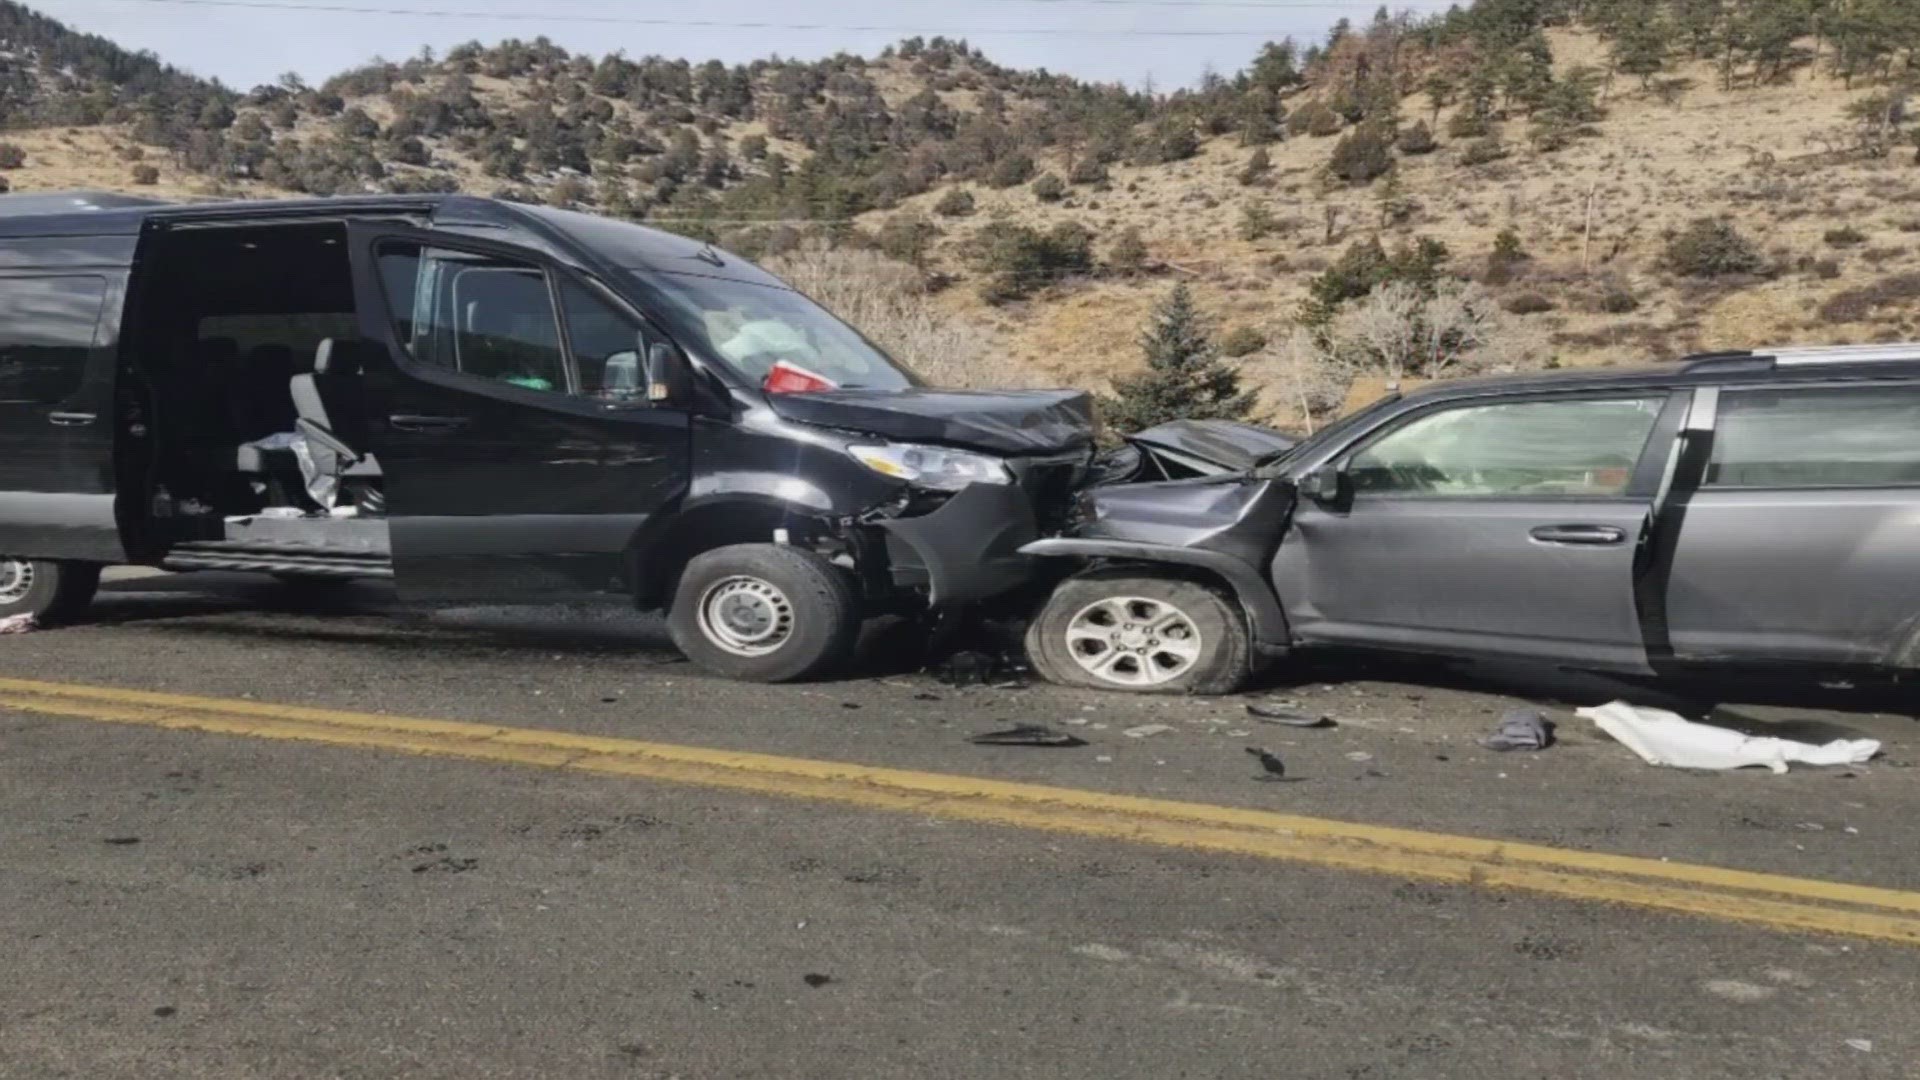 A head-on crash on Colorado Boulevard over Interstate 70 near Idaho Springs injured 12 people. Exit ramps off I-70 were closed, according to the fire department.